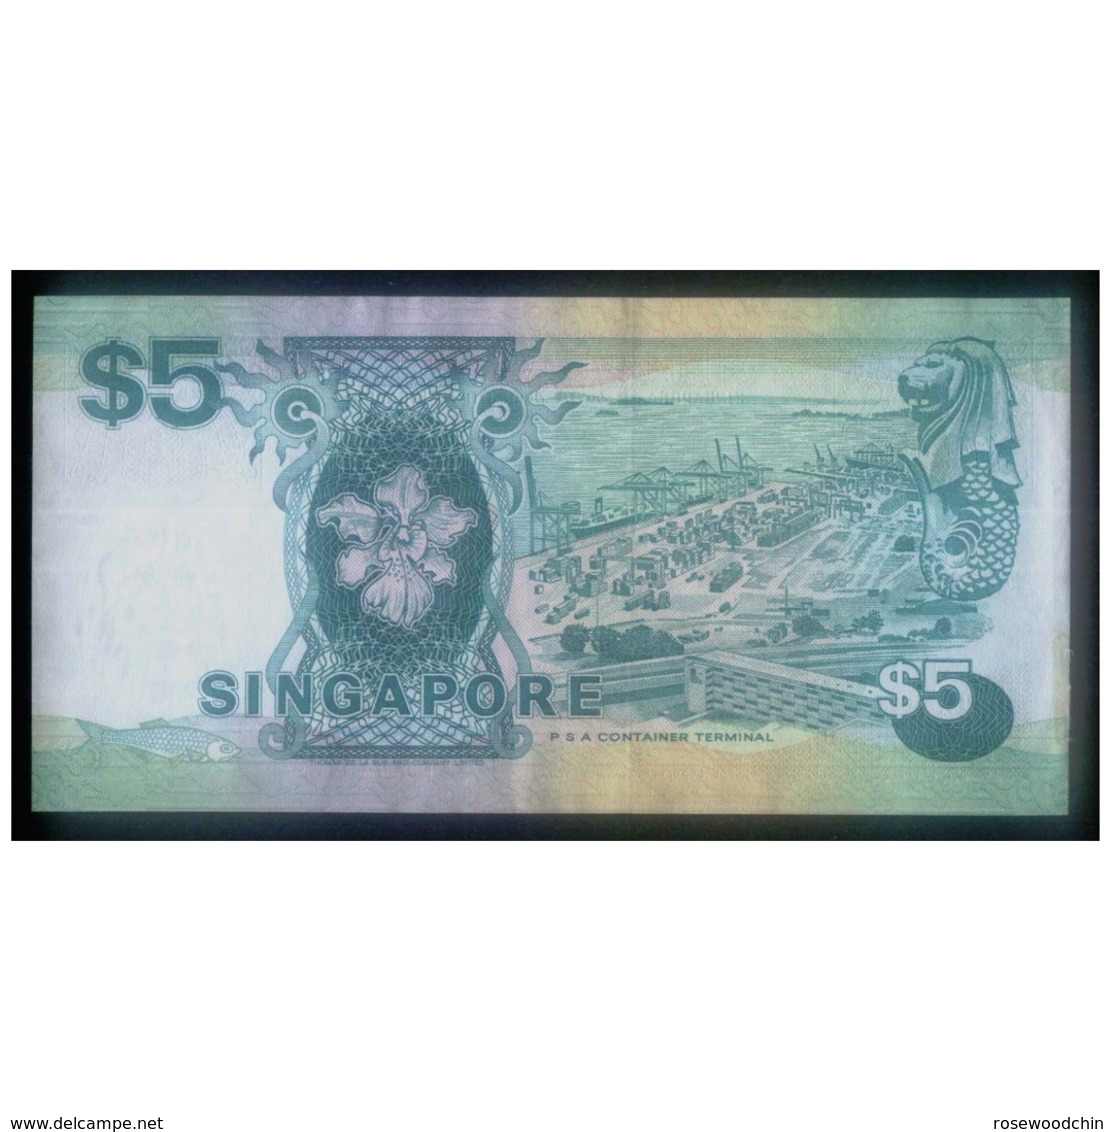 RARE ! Singapore Ship Series $5 HTT Sign W/ Seal CURRENCY MONEY BANKNOTE (#45) - Singapore